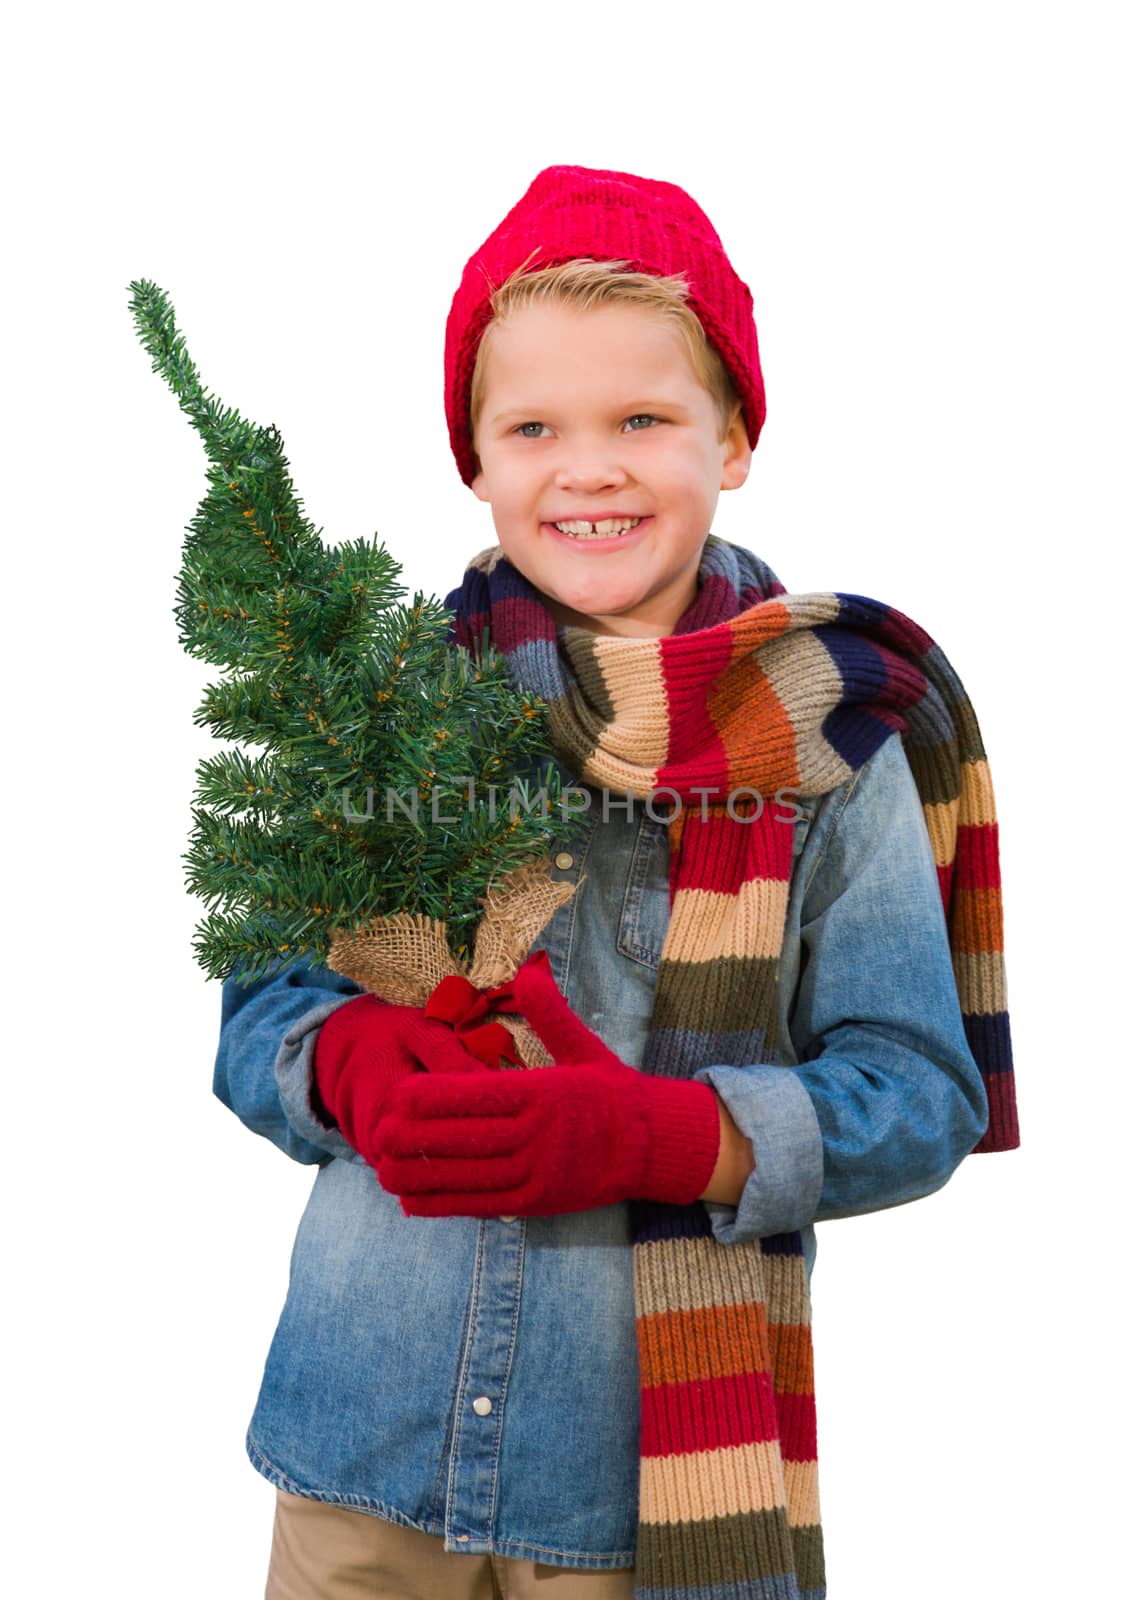 Boy Wearing Mittens and Scarf Holding Christmas Tree On White by Feverpitched